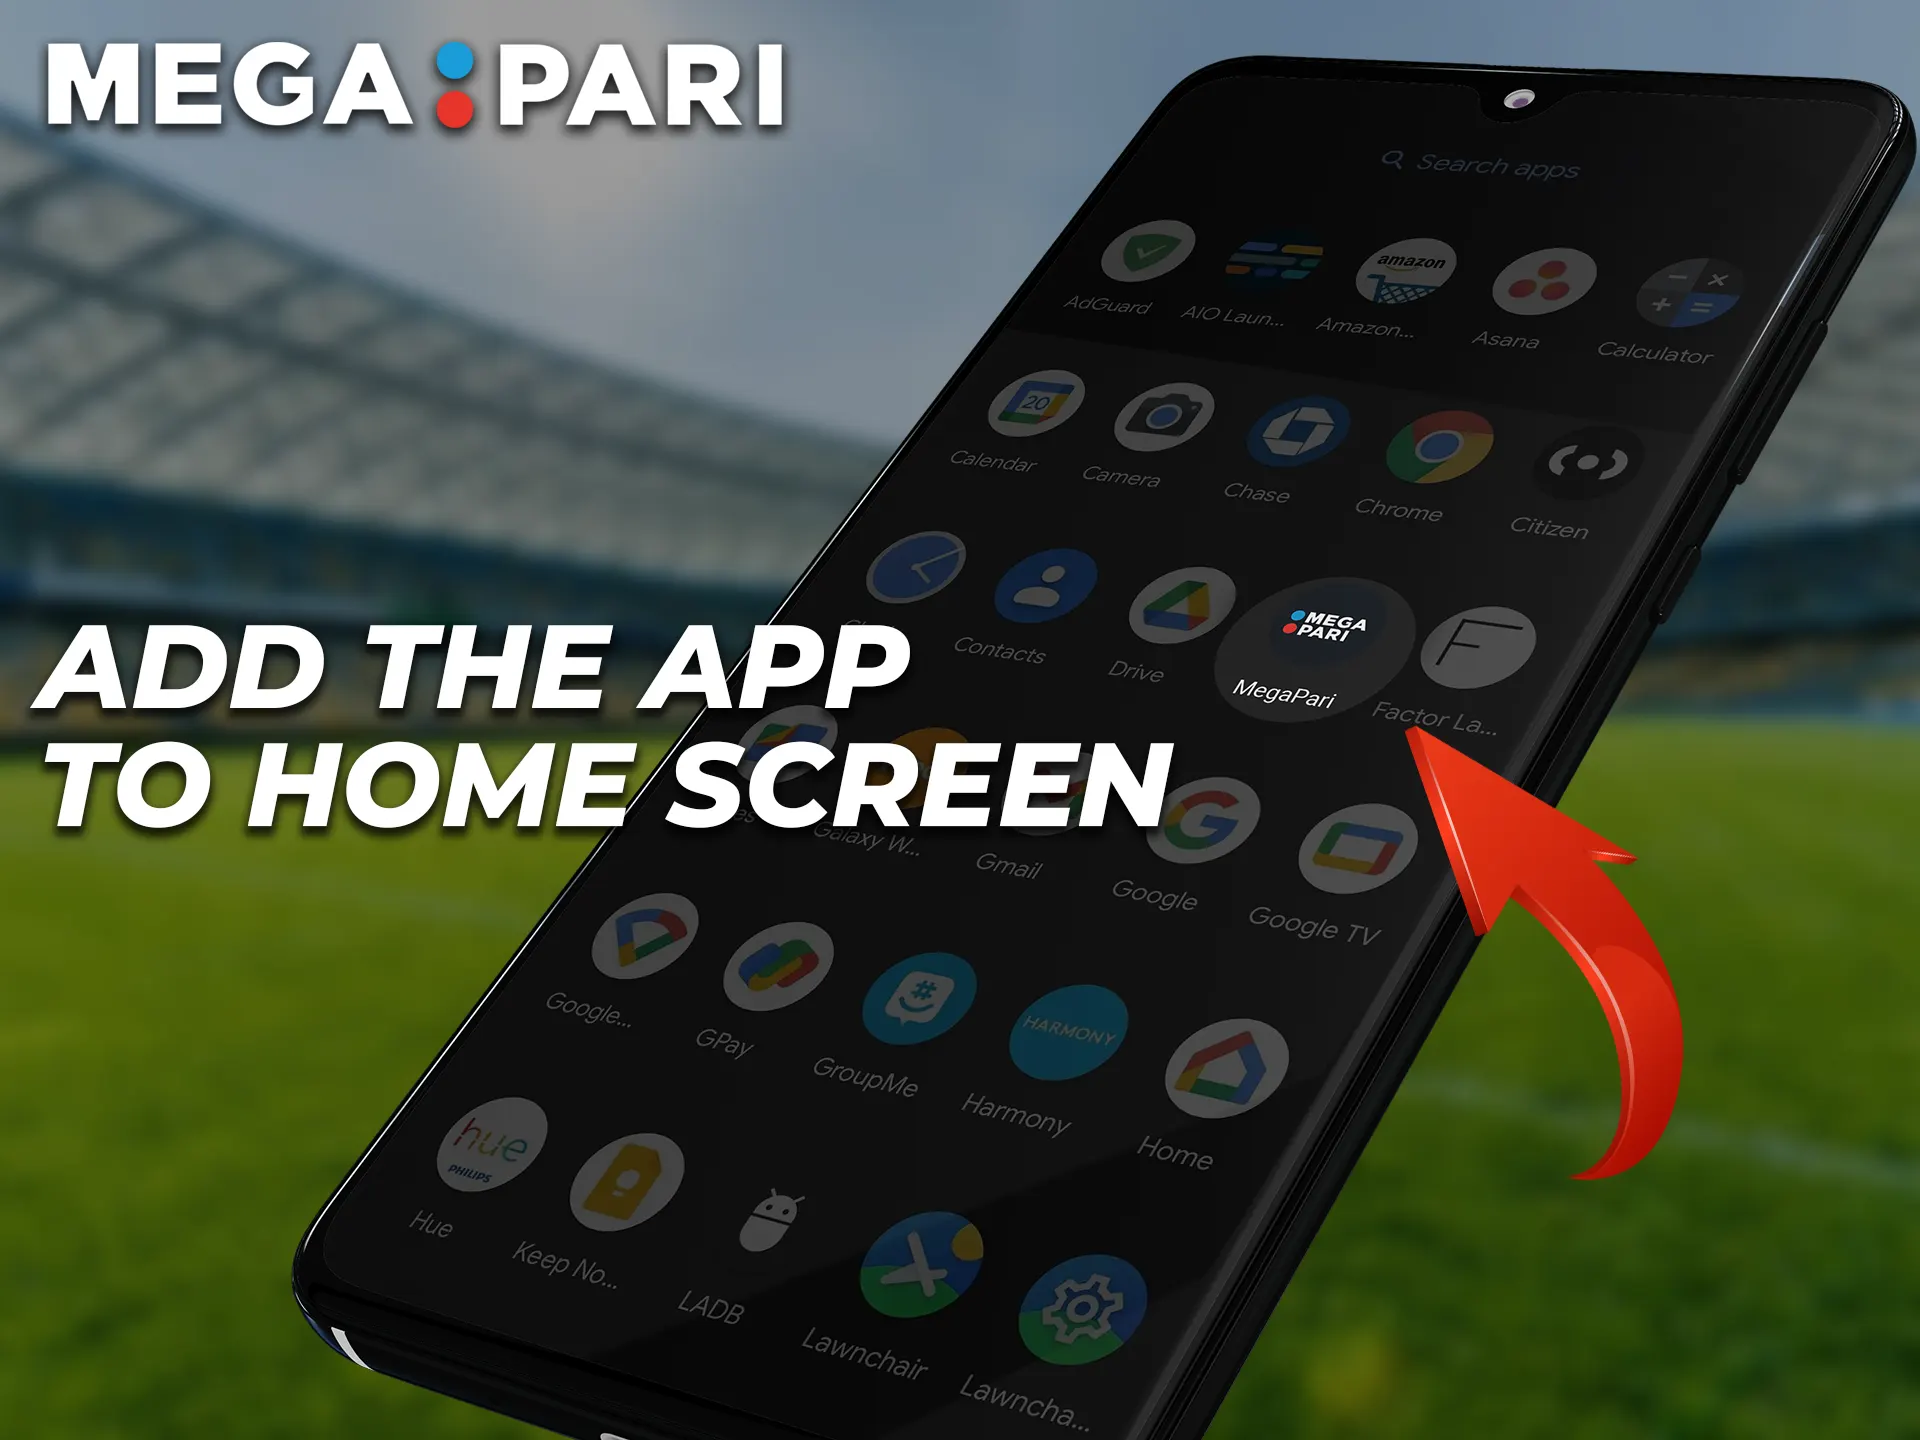 By following the instructions you can add Megapari app to the home screen of your Android smartphone.